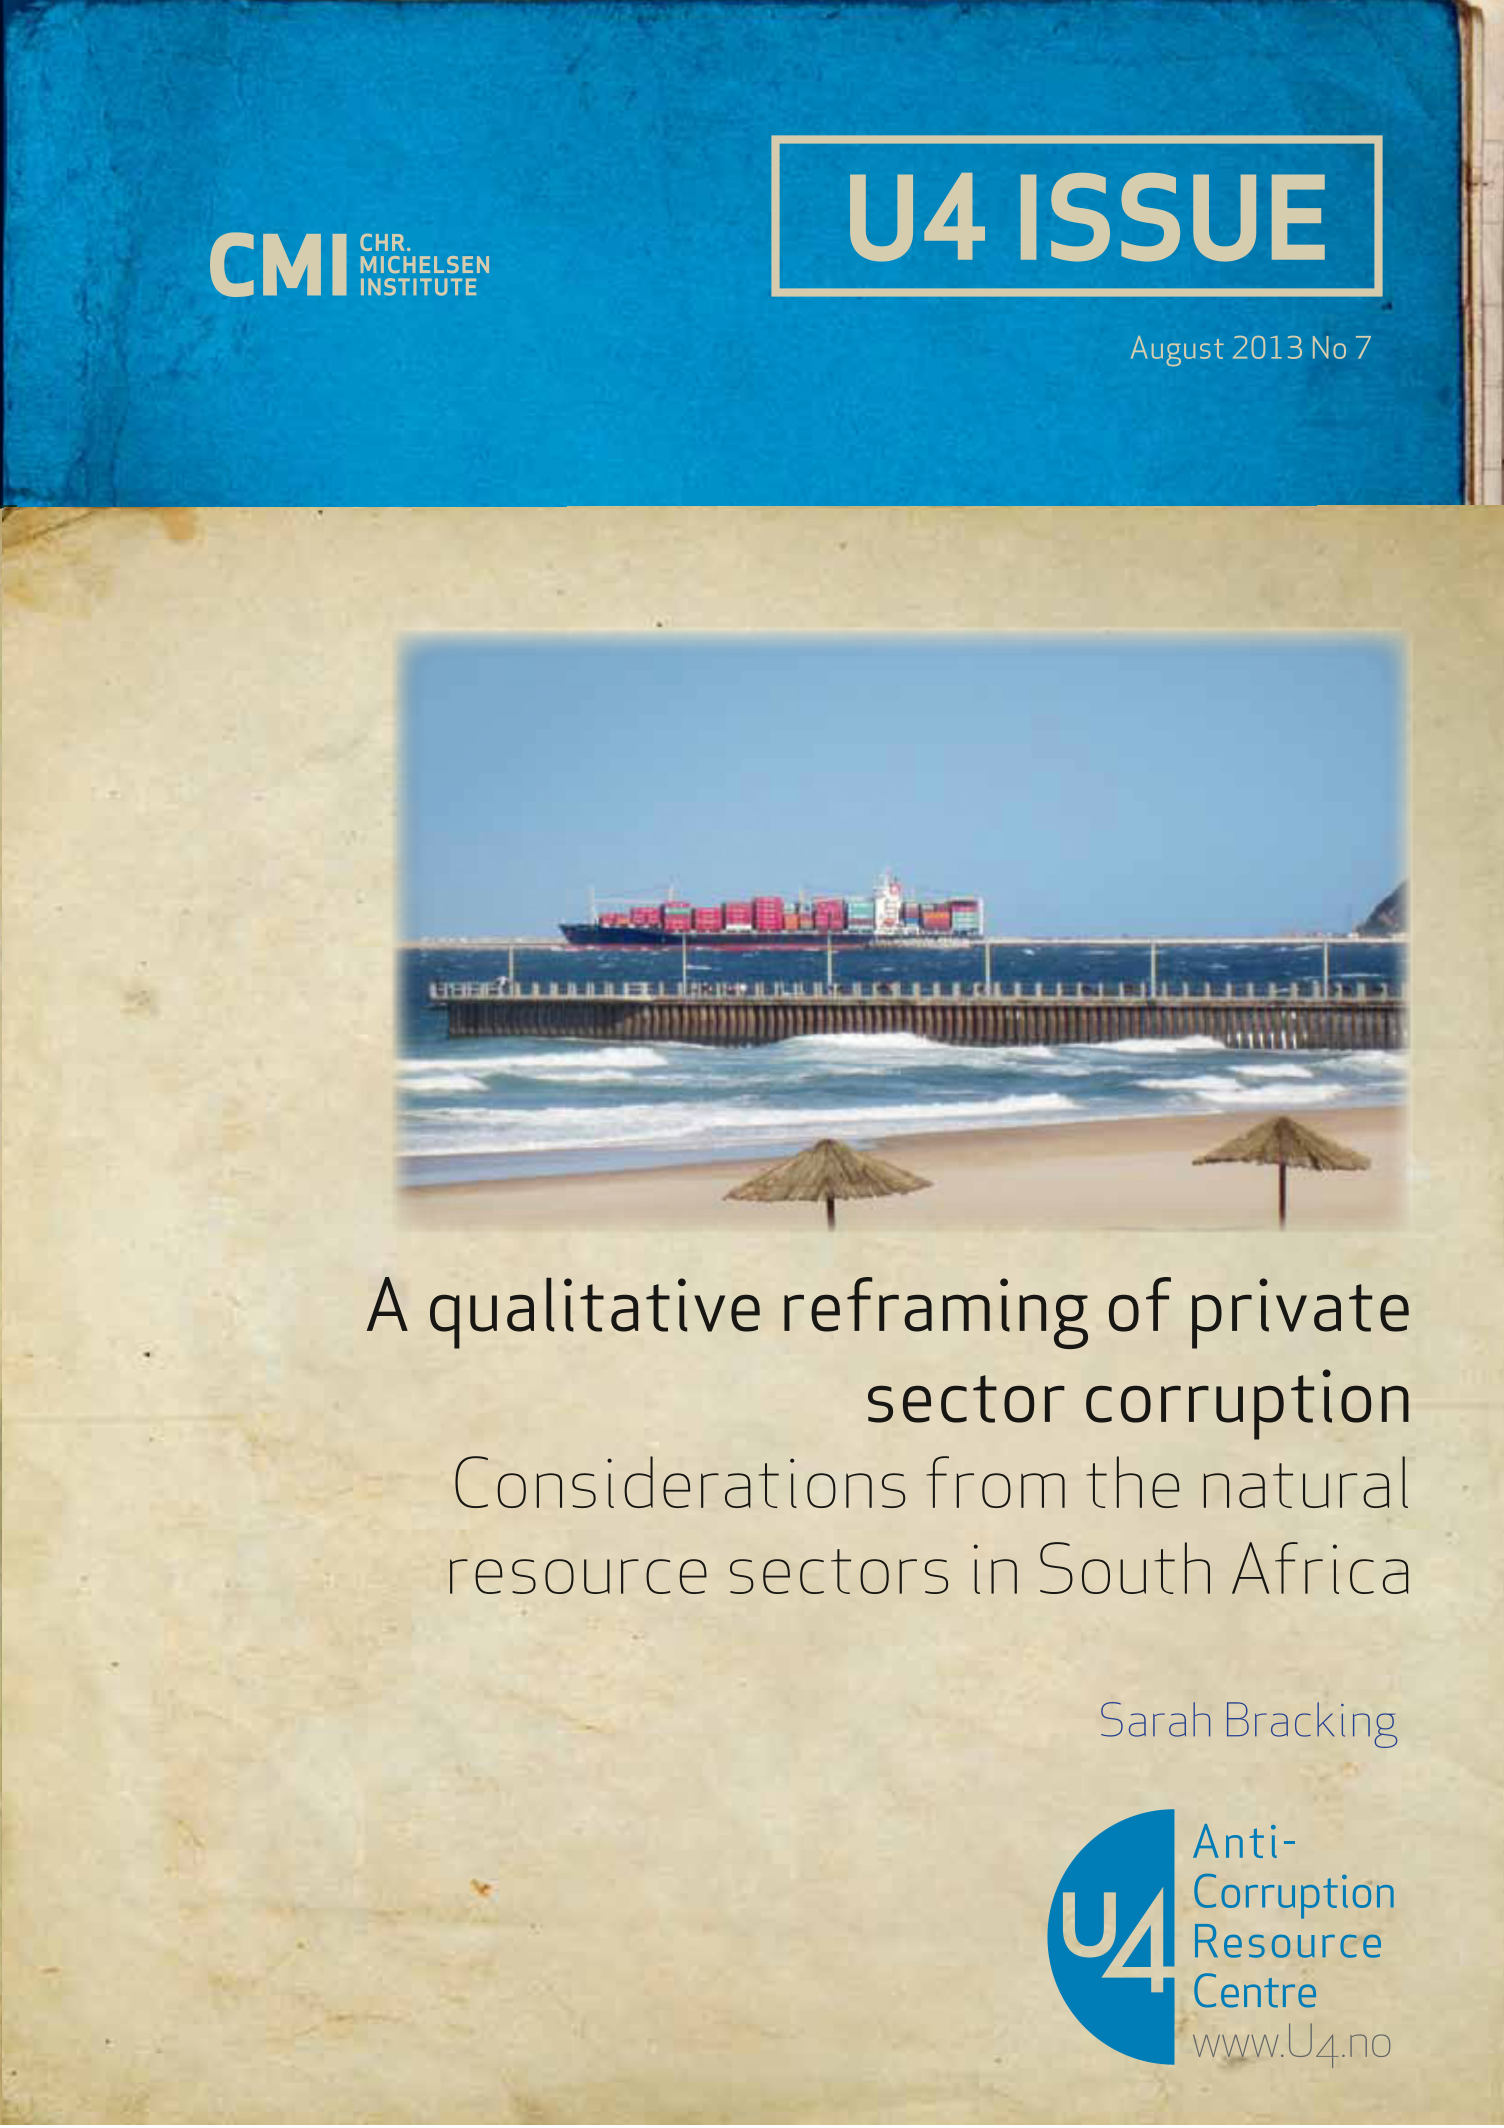 A qualitative reframing of private sector corruption: Considerations from the natural resource sectors in South Africa